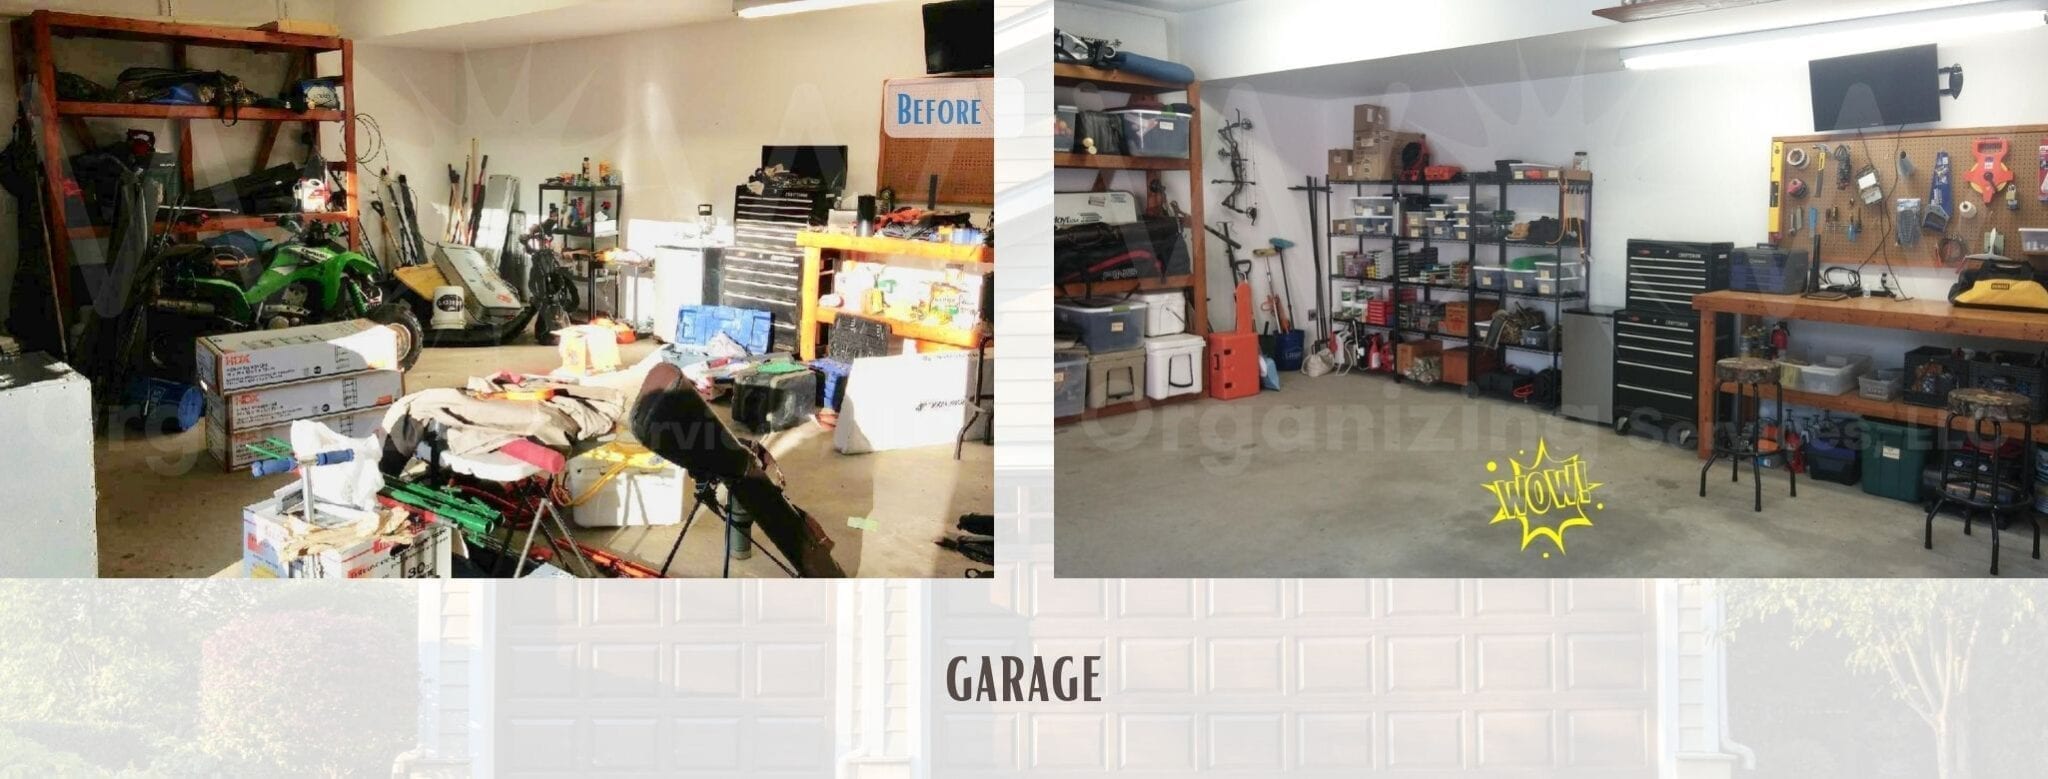 garage decluttered and organized